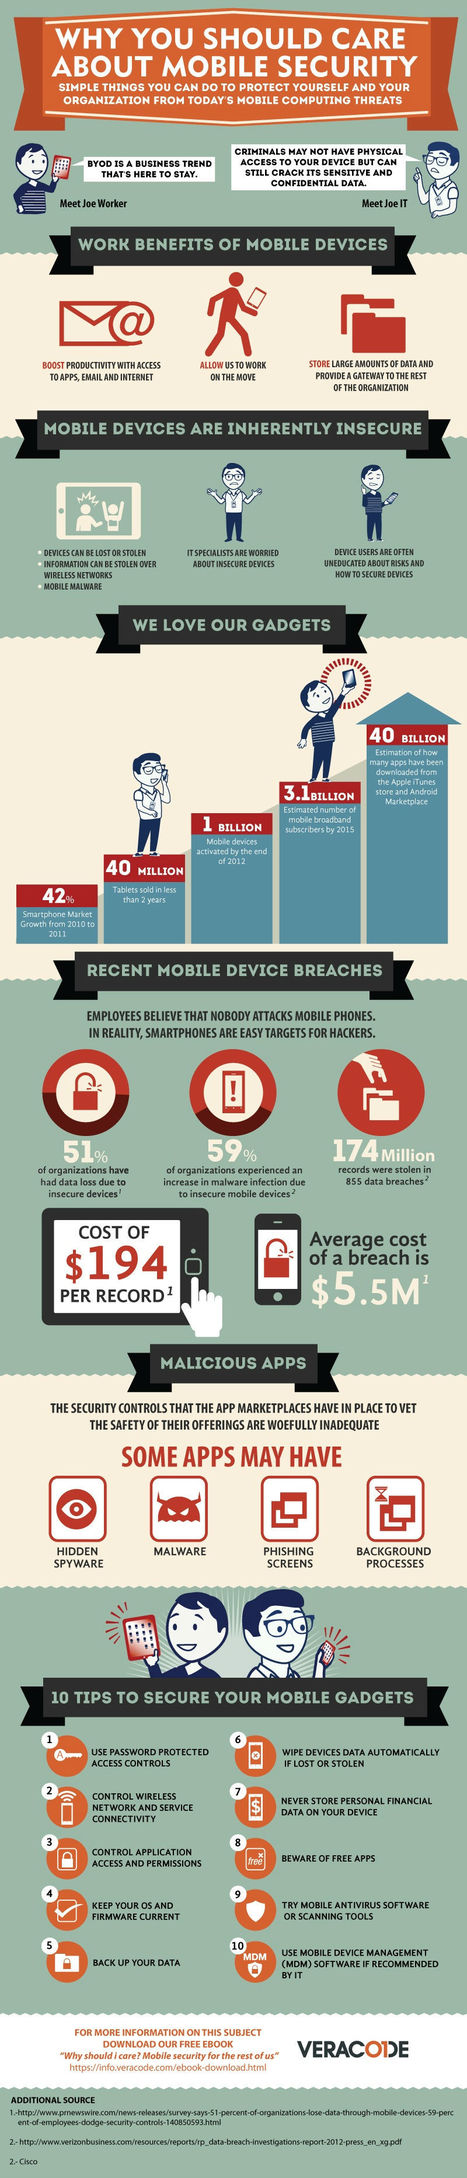 Why You Should Care About Mobile Security [INFOGRAPHIC] | 21st Century Learning and Teaching | Scoop.it